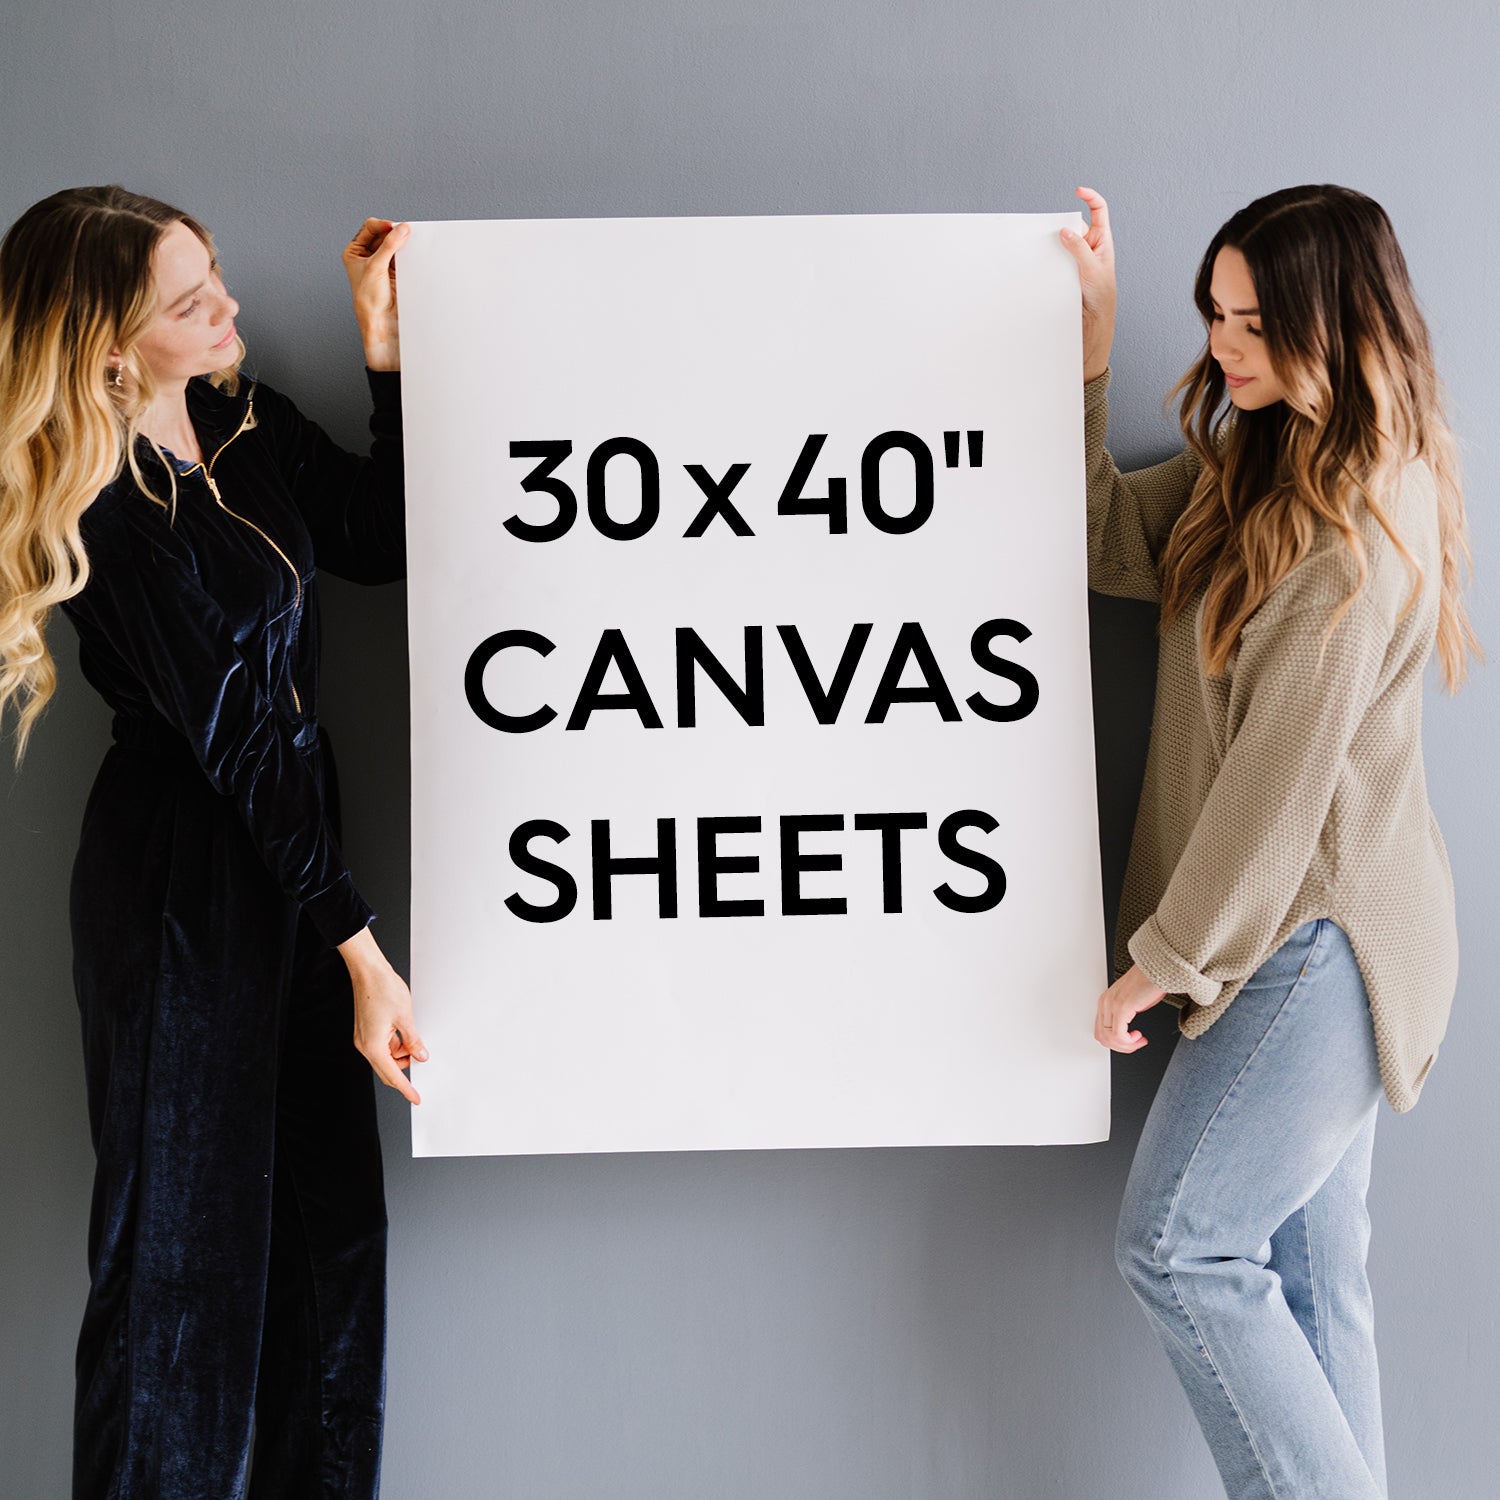 30x40" Big Painting Canvas - Rolled 100% Cotton Canvas Sheets - Hanger Frames